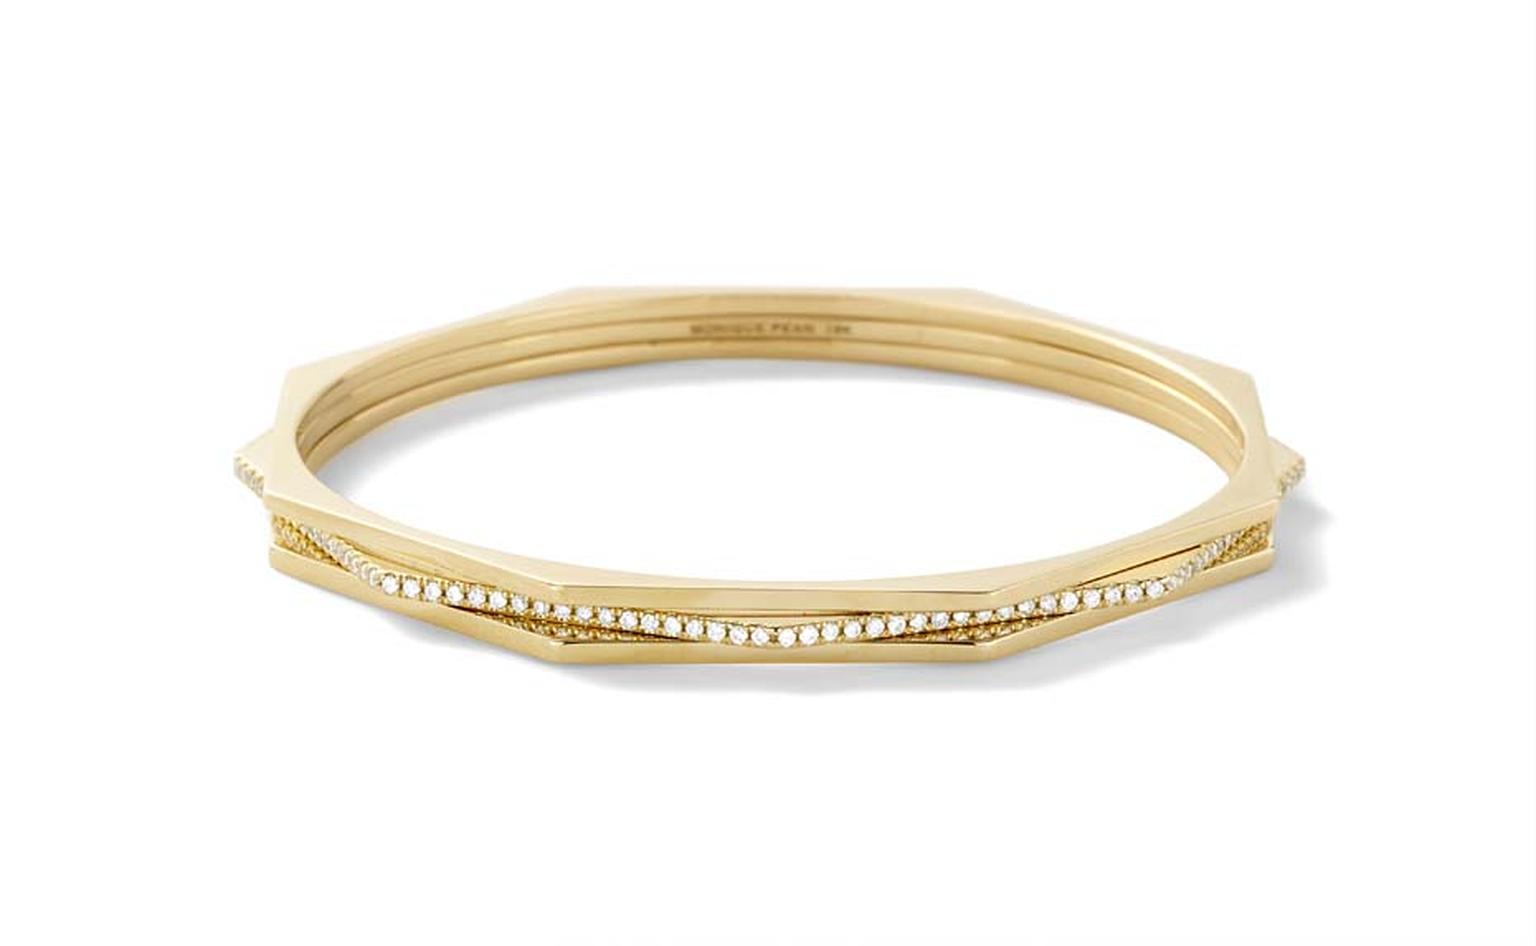 Hachi octagonal Monique Péan bangle with white diamond pavé, set in recycled yellow gold.